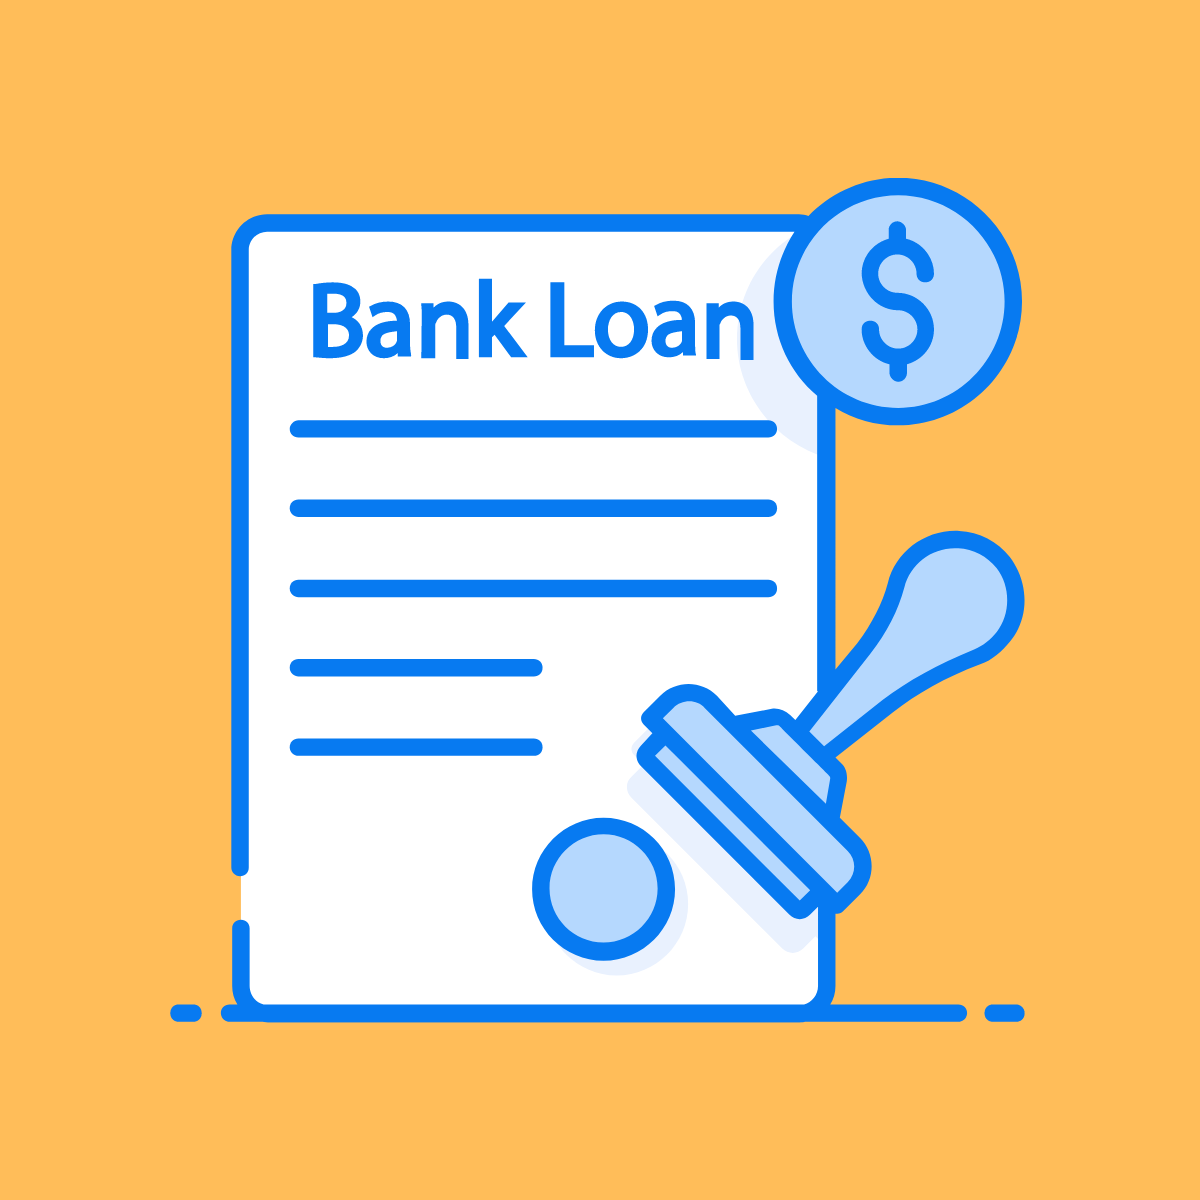 How To Get A Loan From The Bank? - Loans Canada